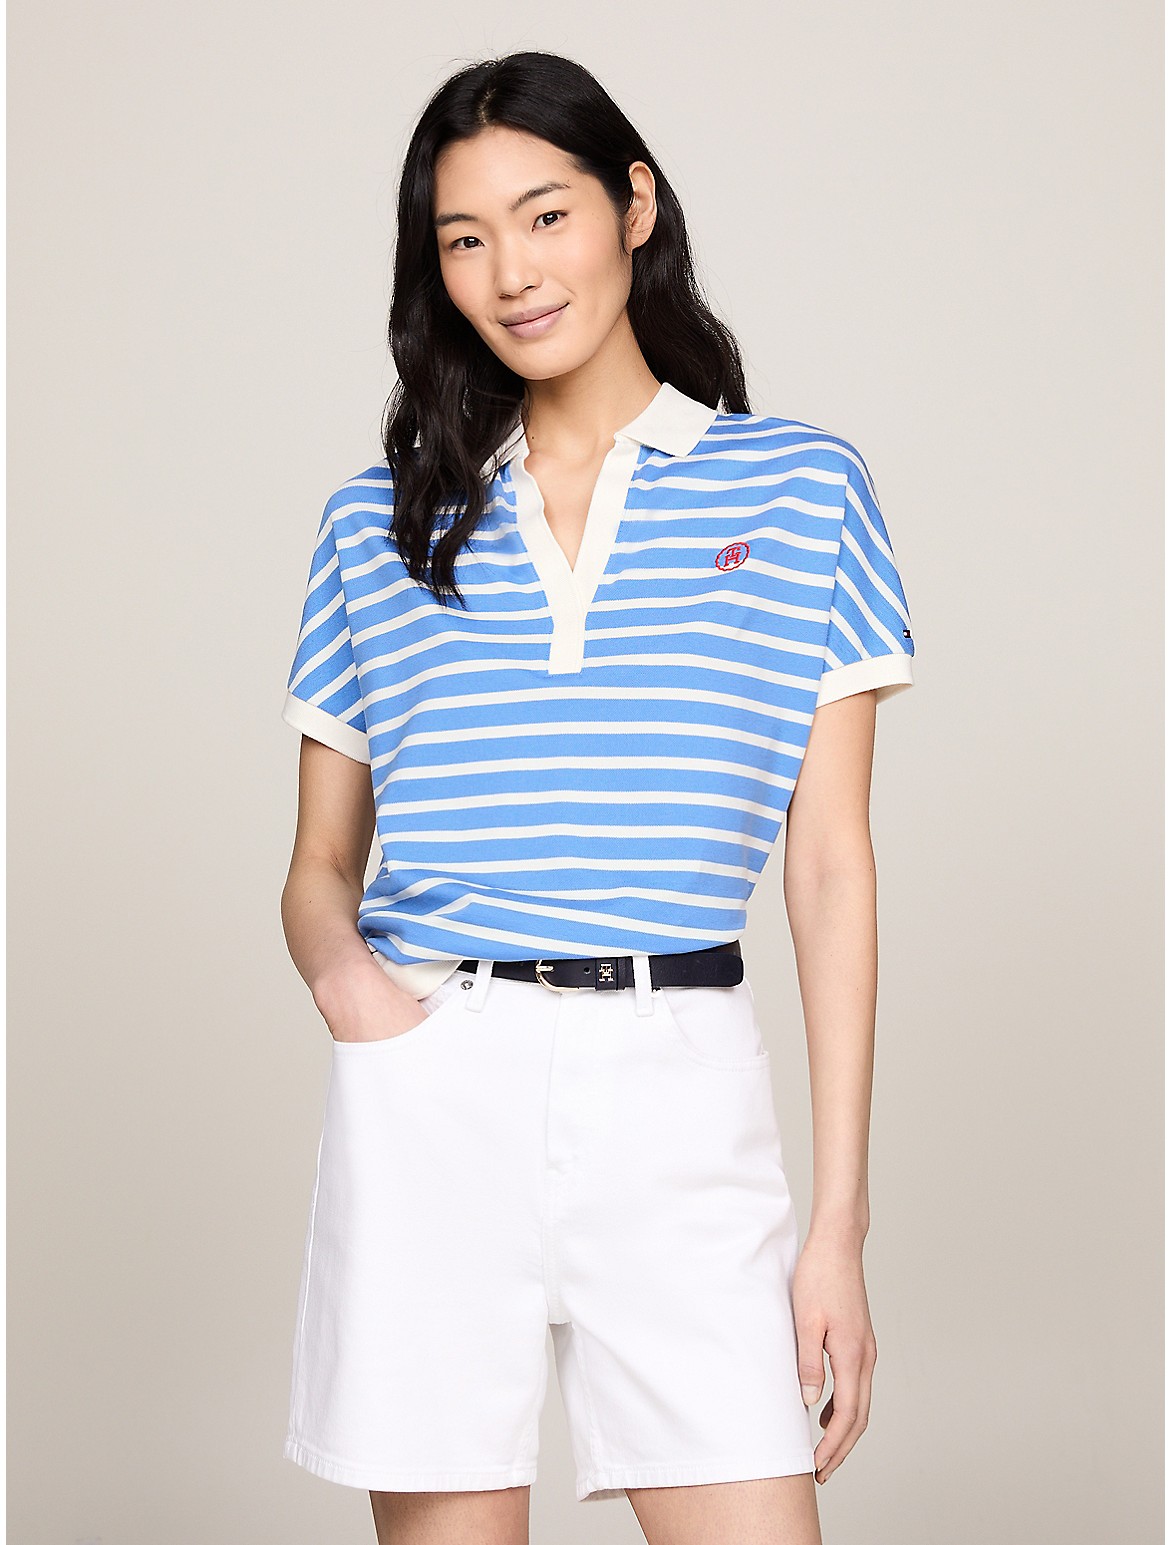 Tommy Hilfiger Women's Relaxed Fit Stripe Open Placket Polo